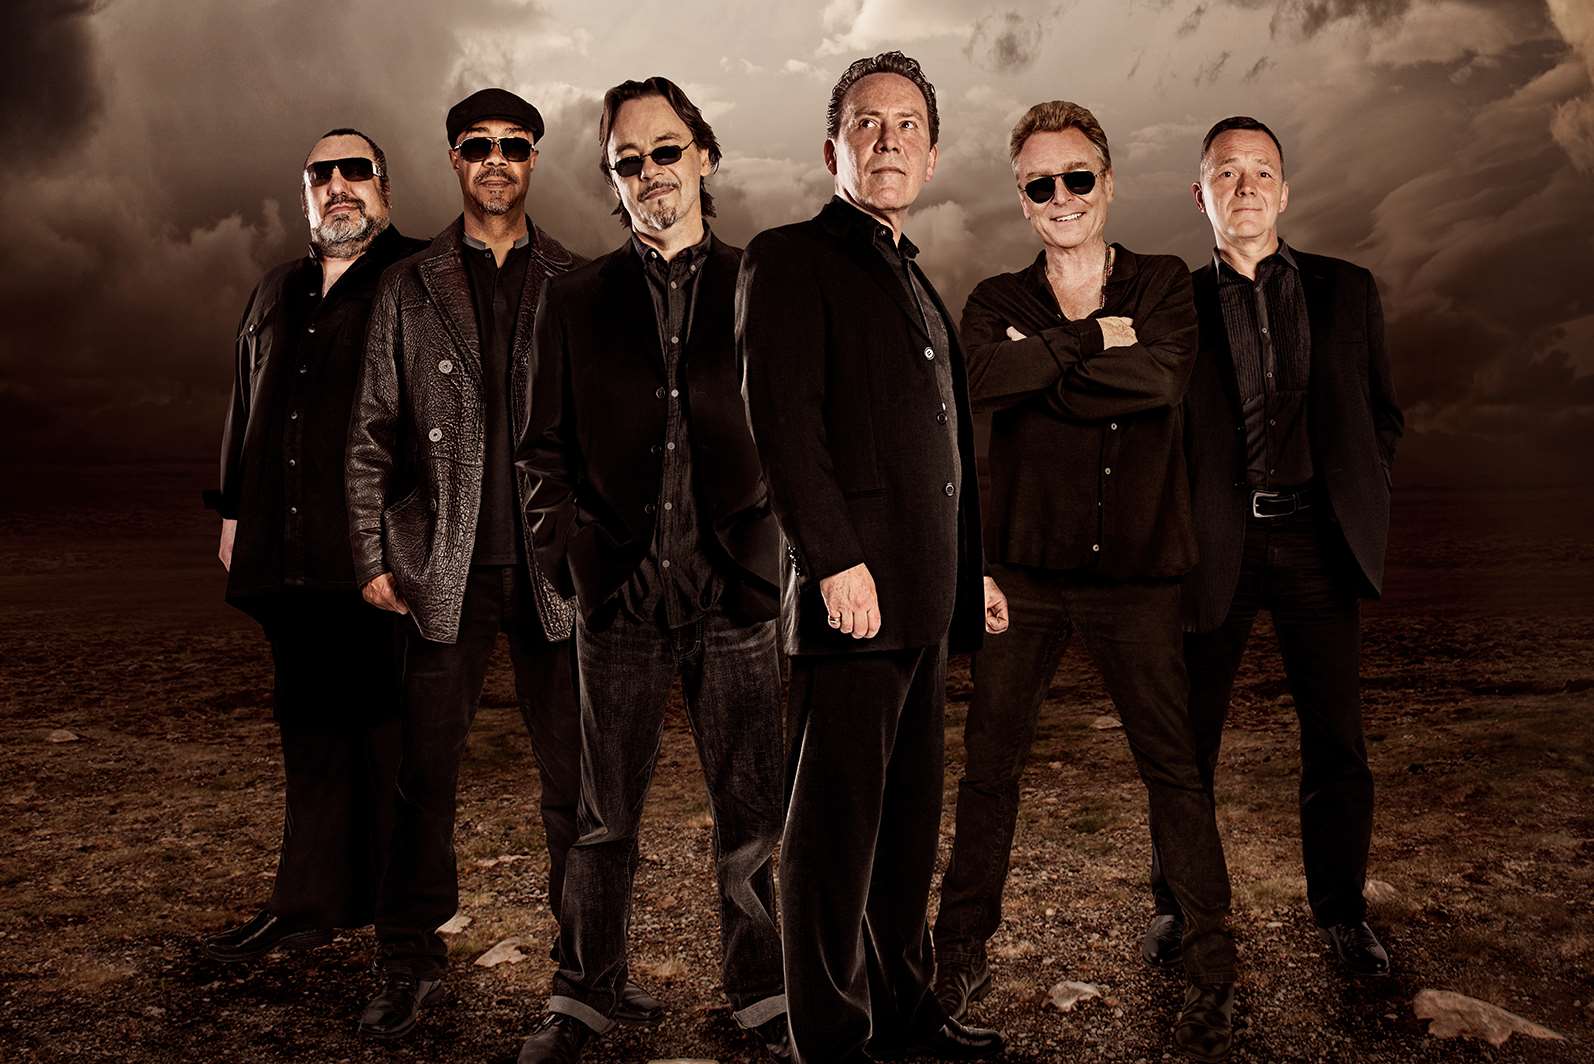 UB40 - coming to Margate's Winter Gardens in November 2014